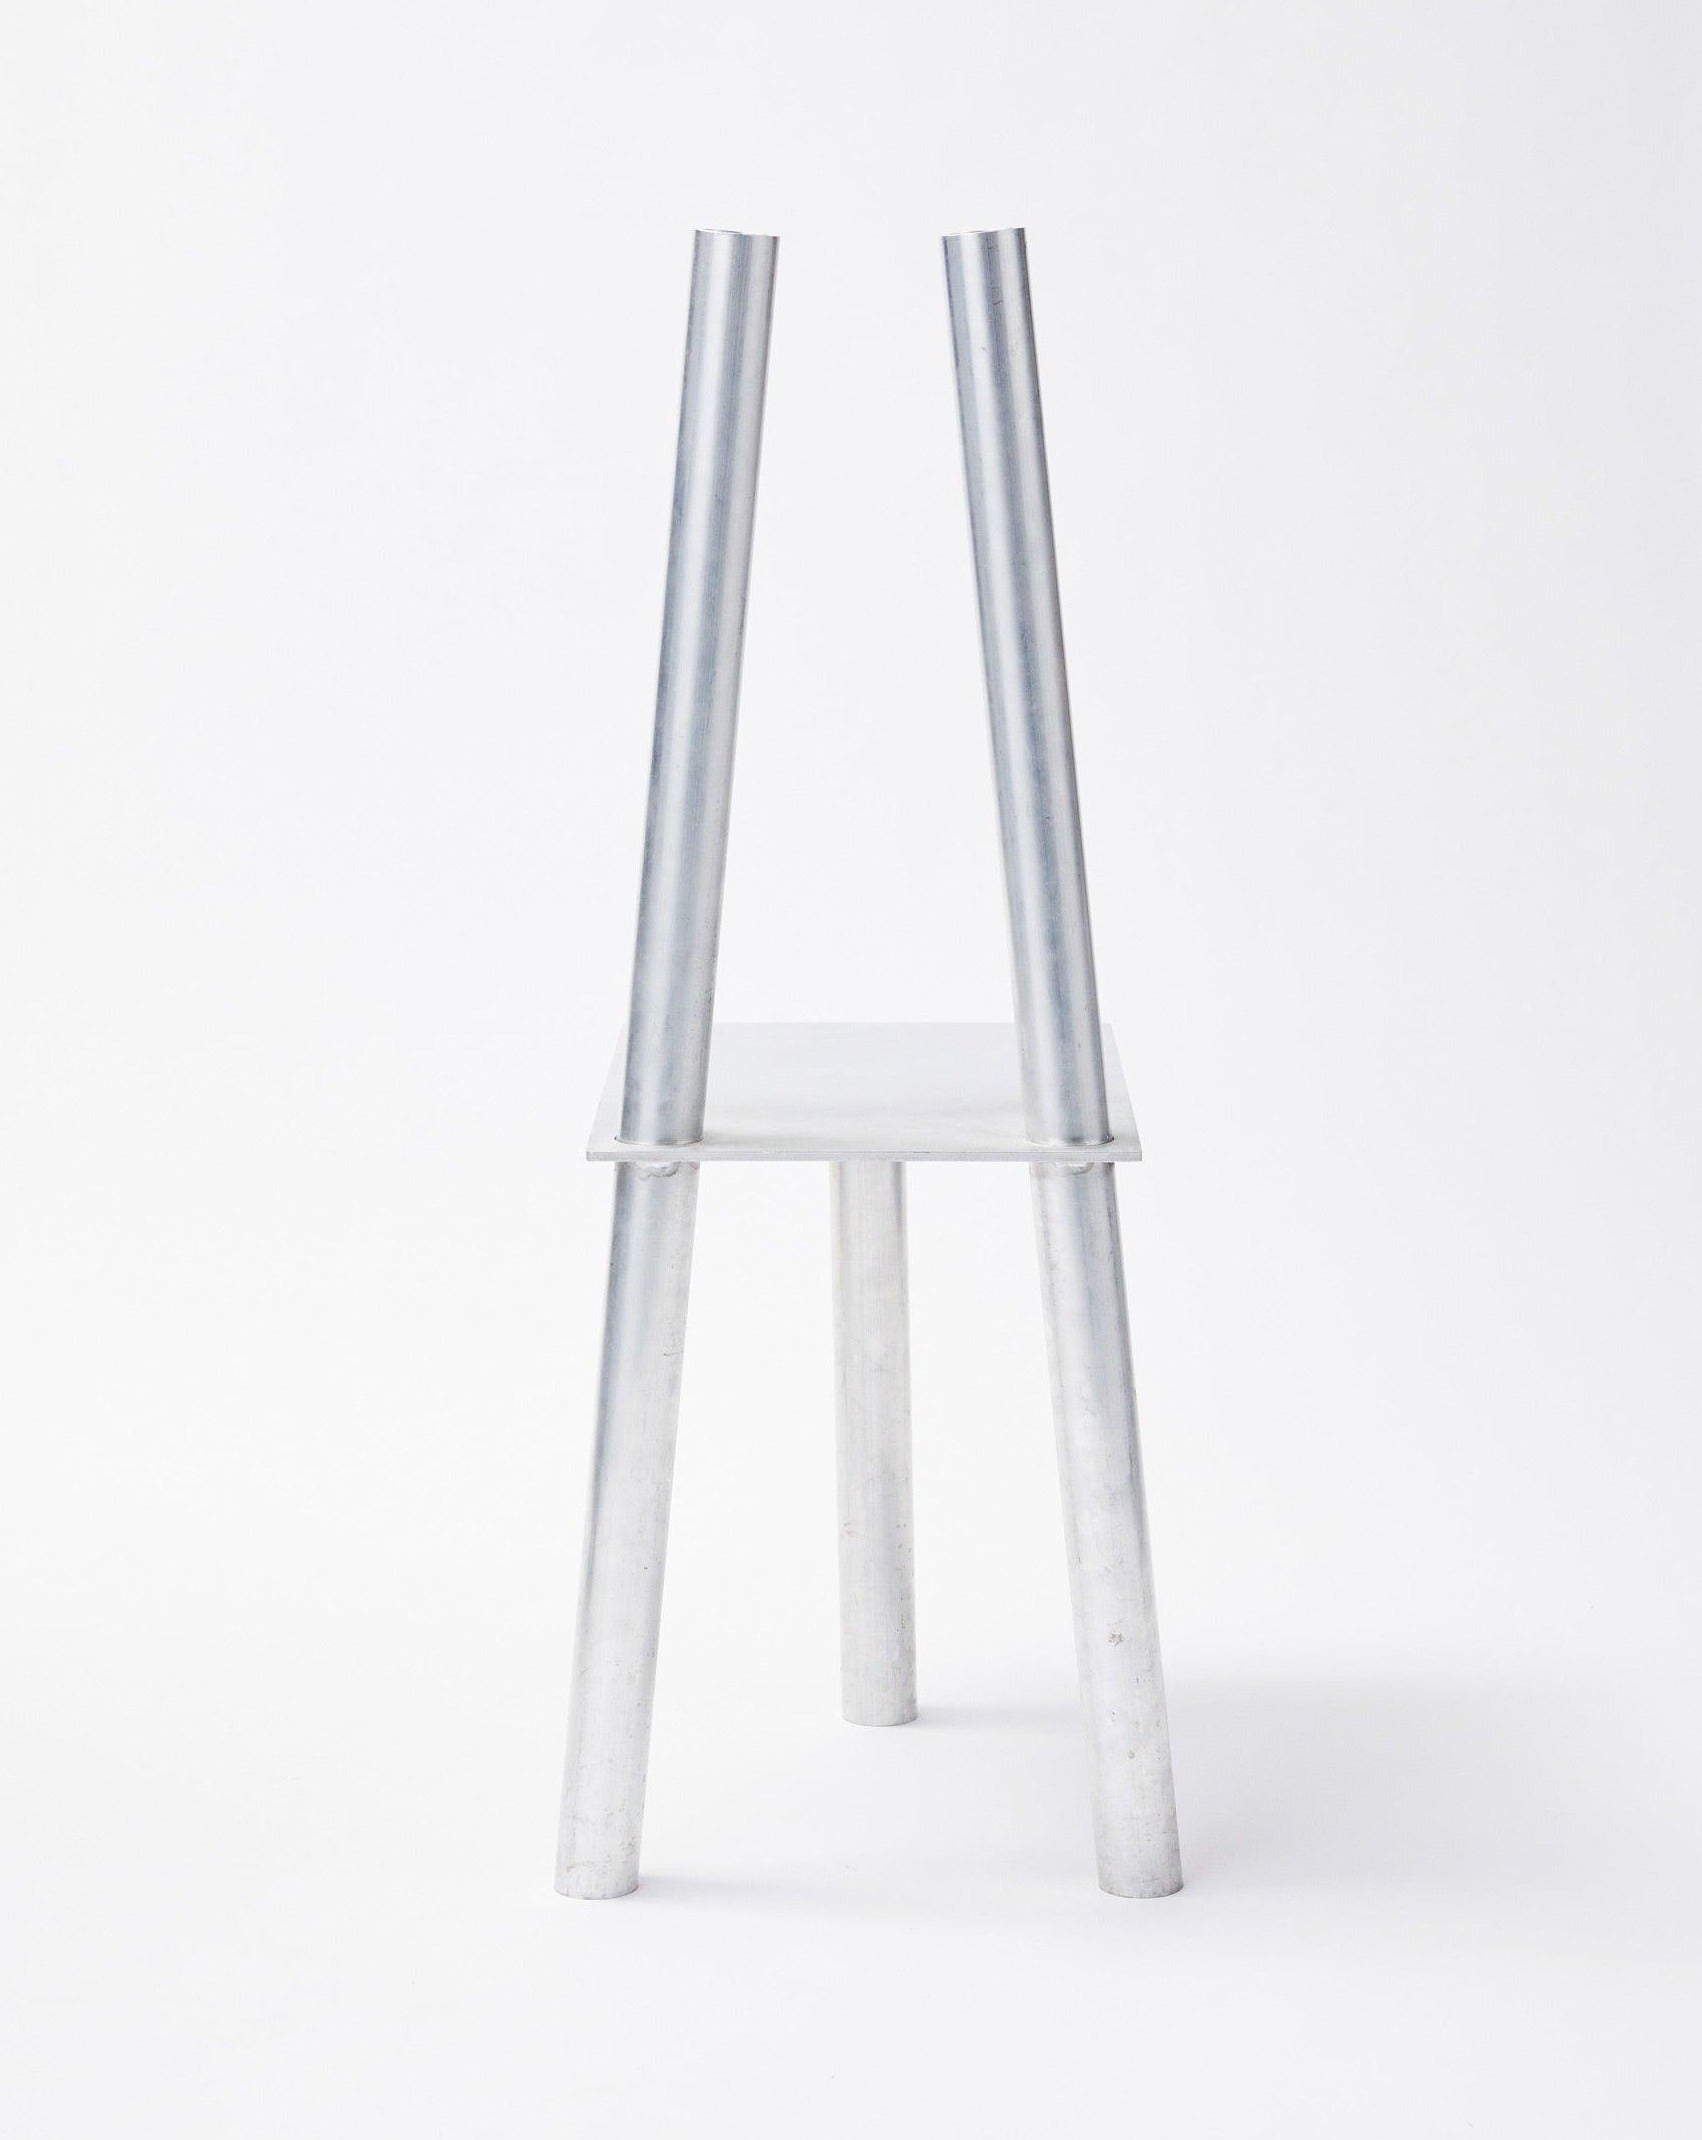 White background, aluminum decorative chair P-L series in rearward facing position